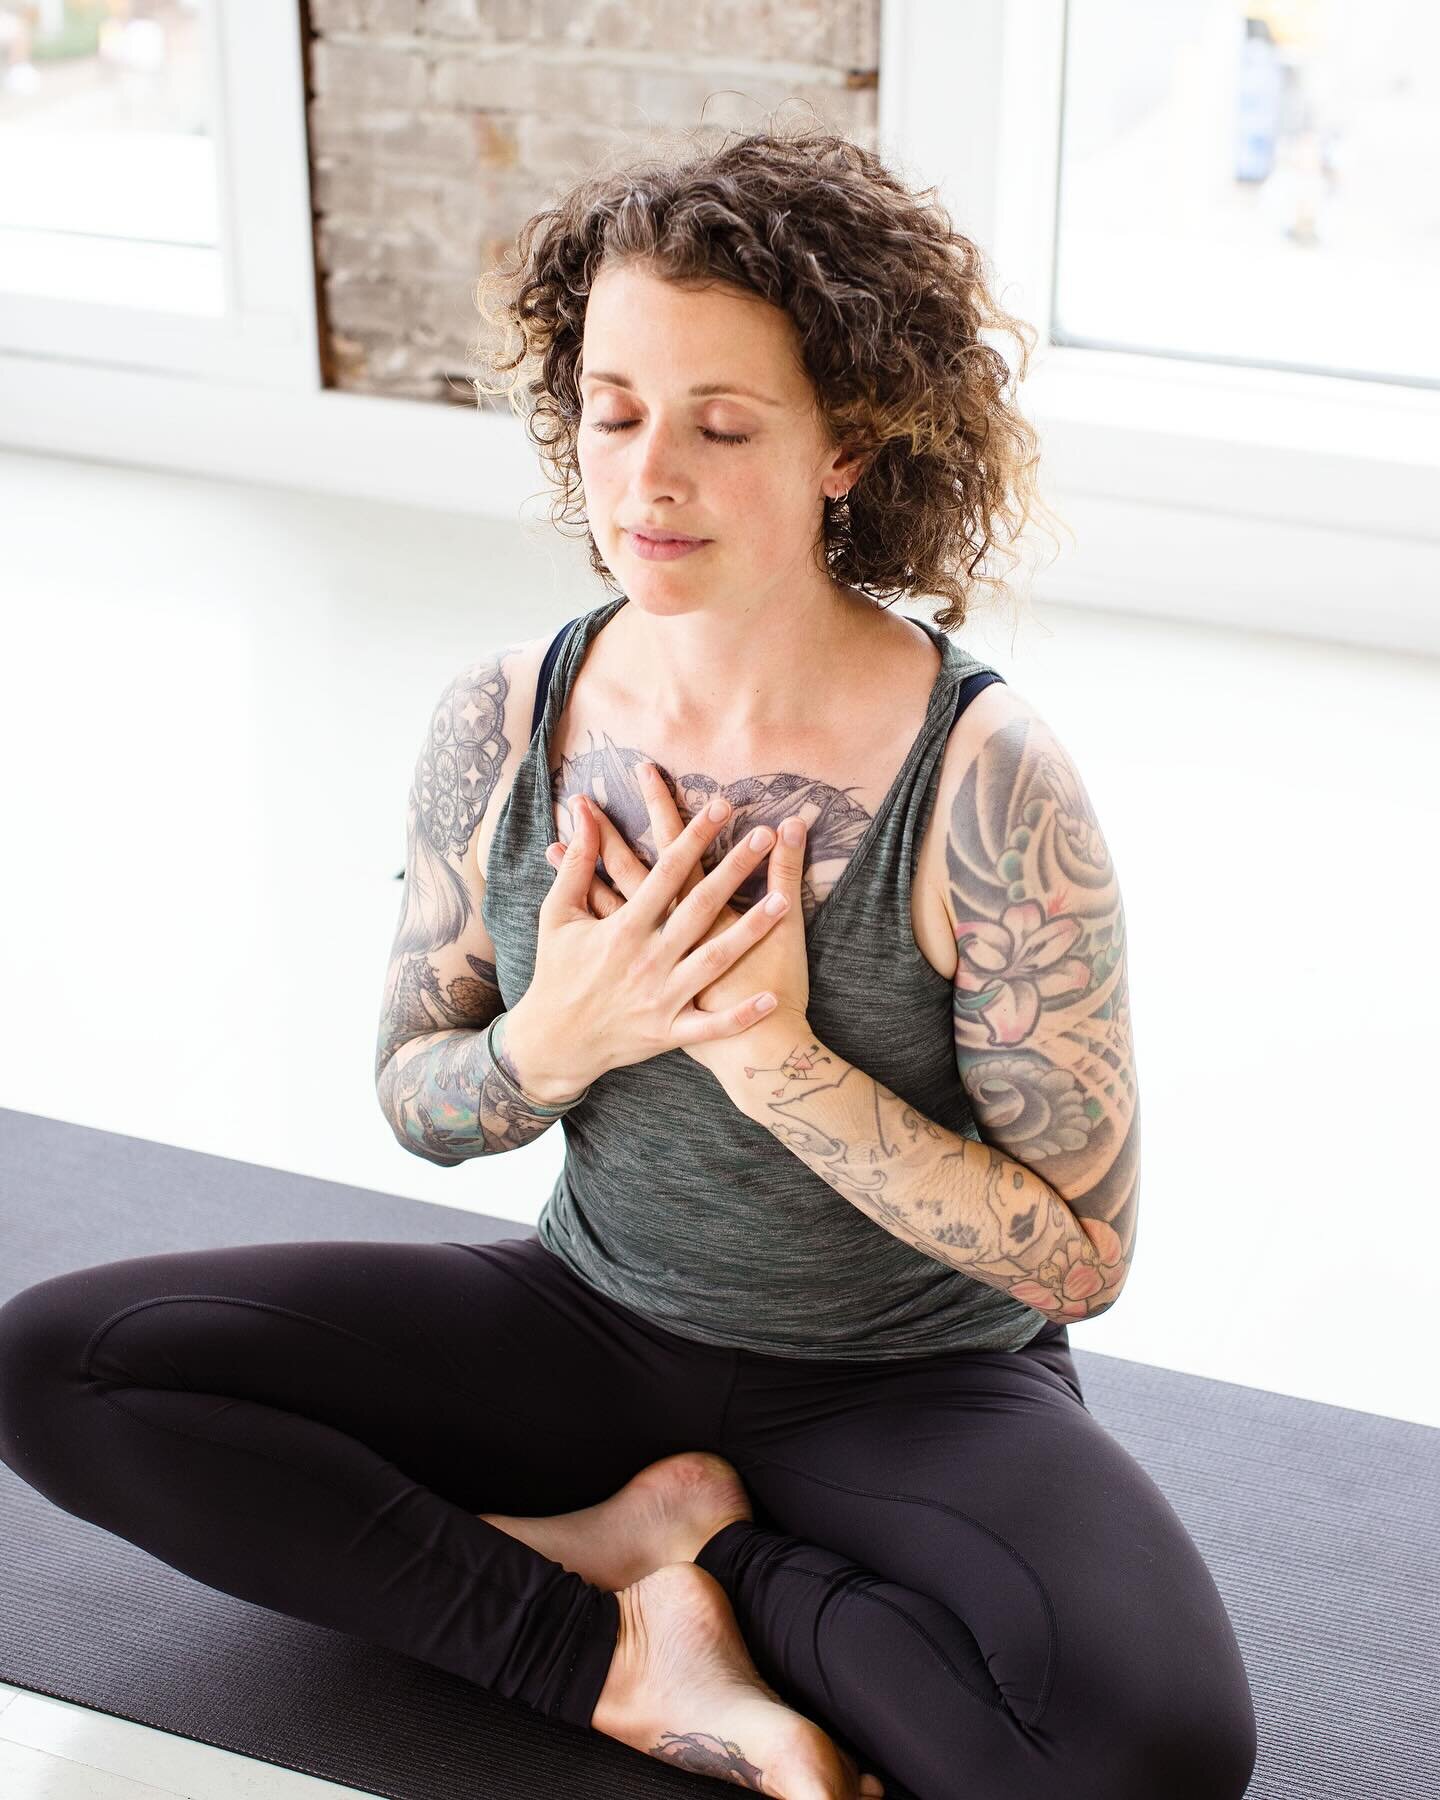 Parents, this is for you! Join Emma for a 6-week series to relieve stress and improve self-regulation while building confidence, strength and mobility in an all levels yoga class with your little one.

Come as you are, meet other new parents and buil